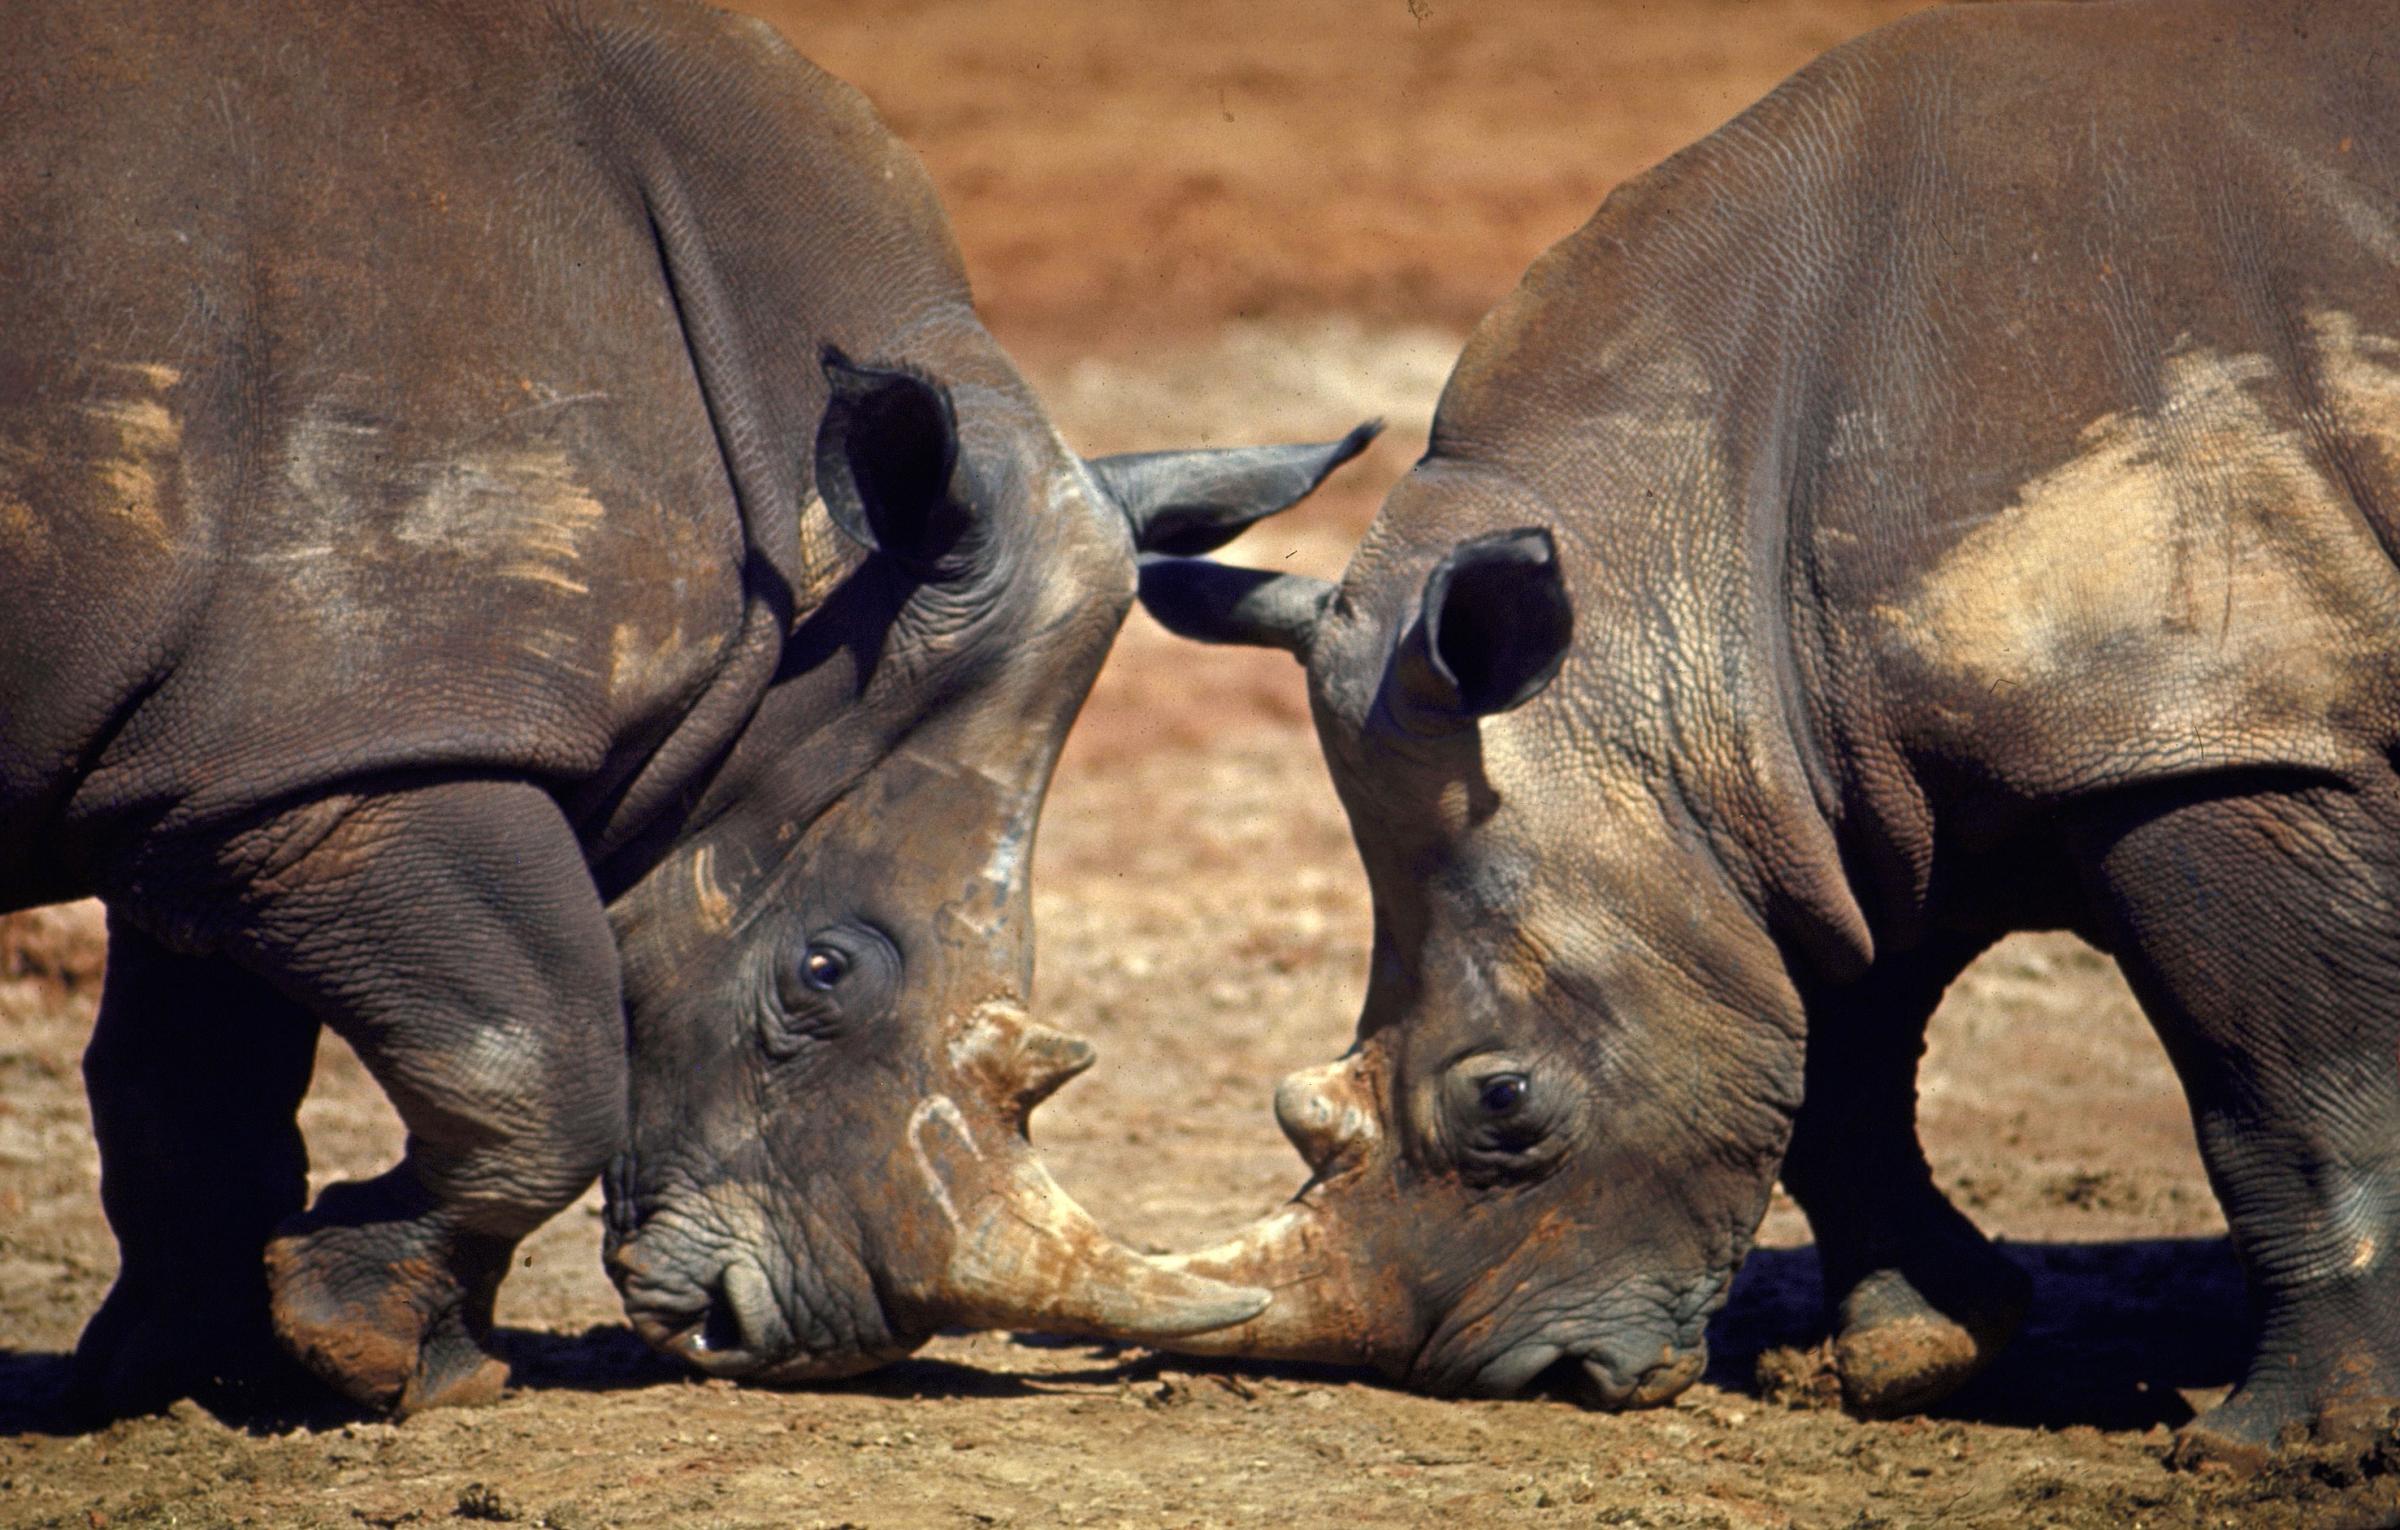 Tusk to tusk, two white rhinos eye each other at the Oklahoma zoo. The largest of all rhinos, they came from Zululand in South Africa where only 300 survive. No white rhino has yet been born in the U.S. through several zoos have pairs today and hope to mate them.